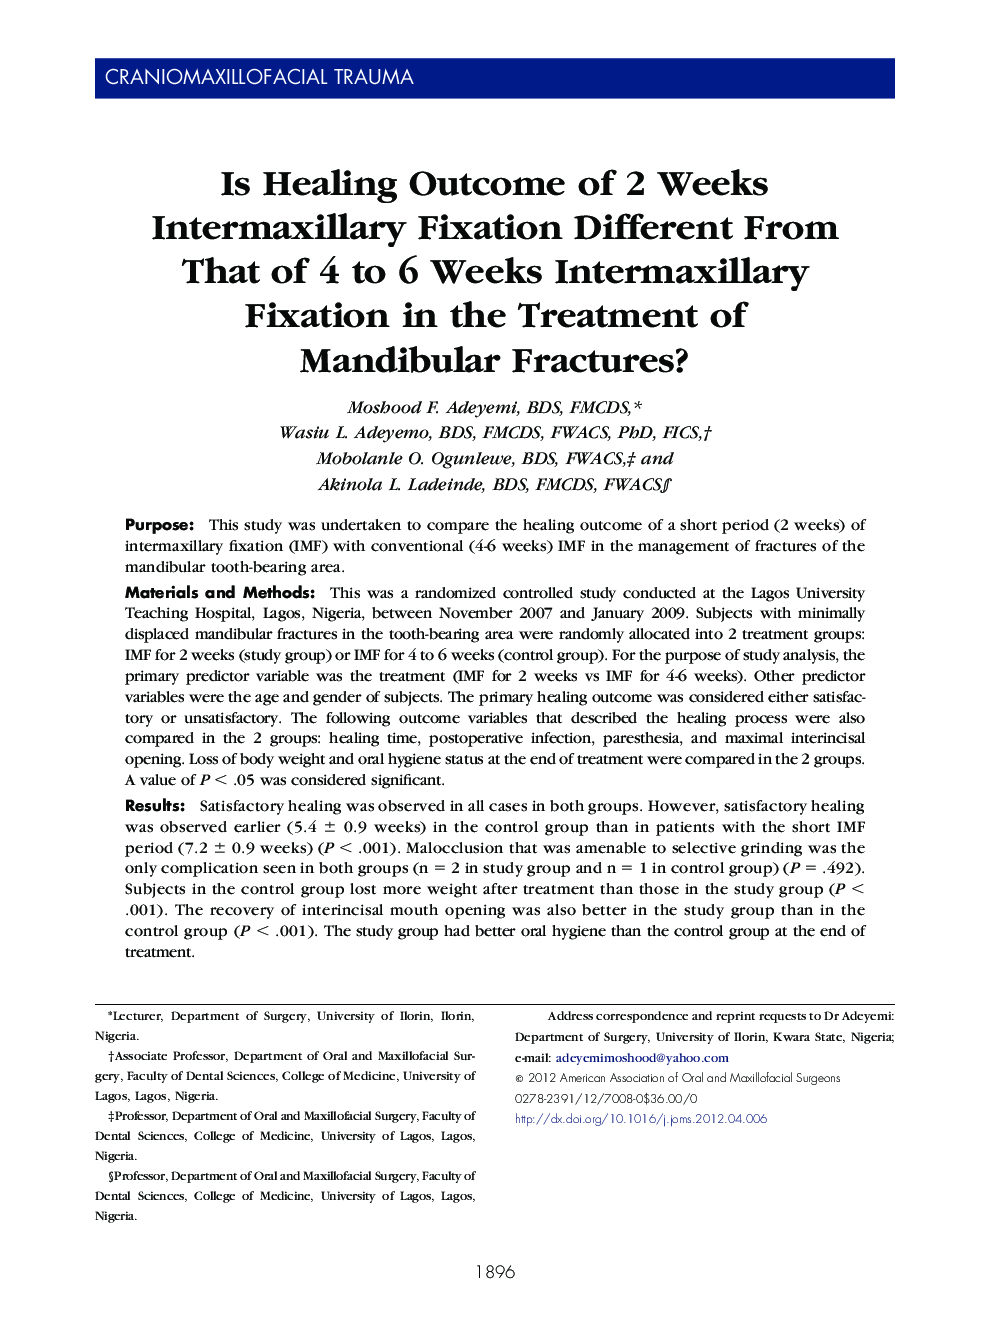 Is Healing Outcome of 2 Weeks Intermaxillary Fixation Different From That of 4 to 6 Weeks Intermaxillary Fixation in the Treatment of Mandibular Fractures?